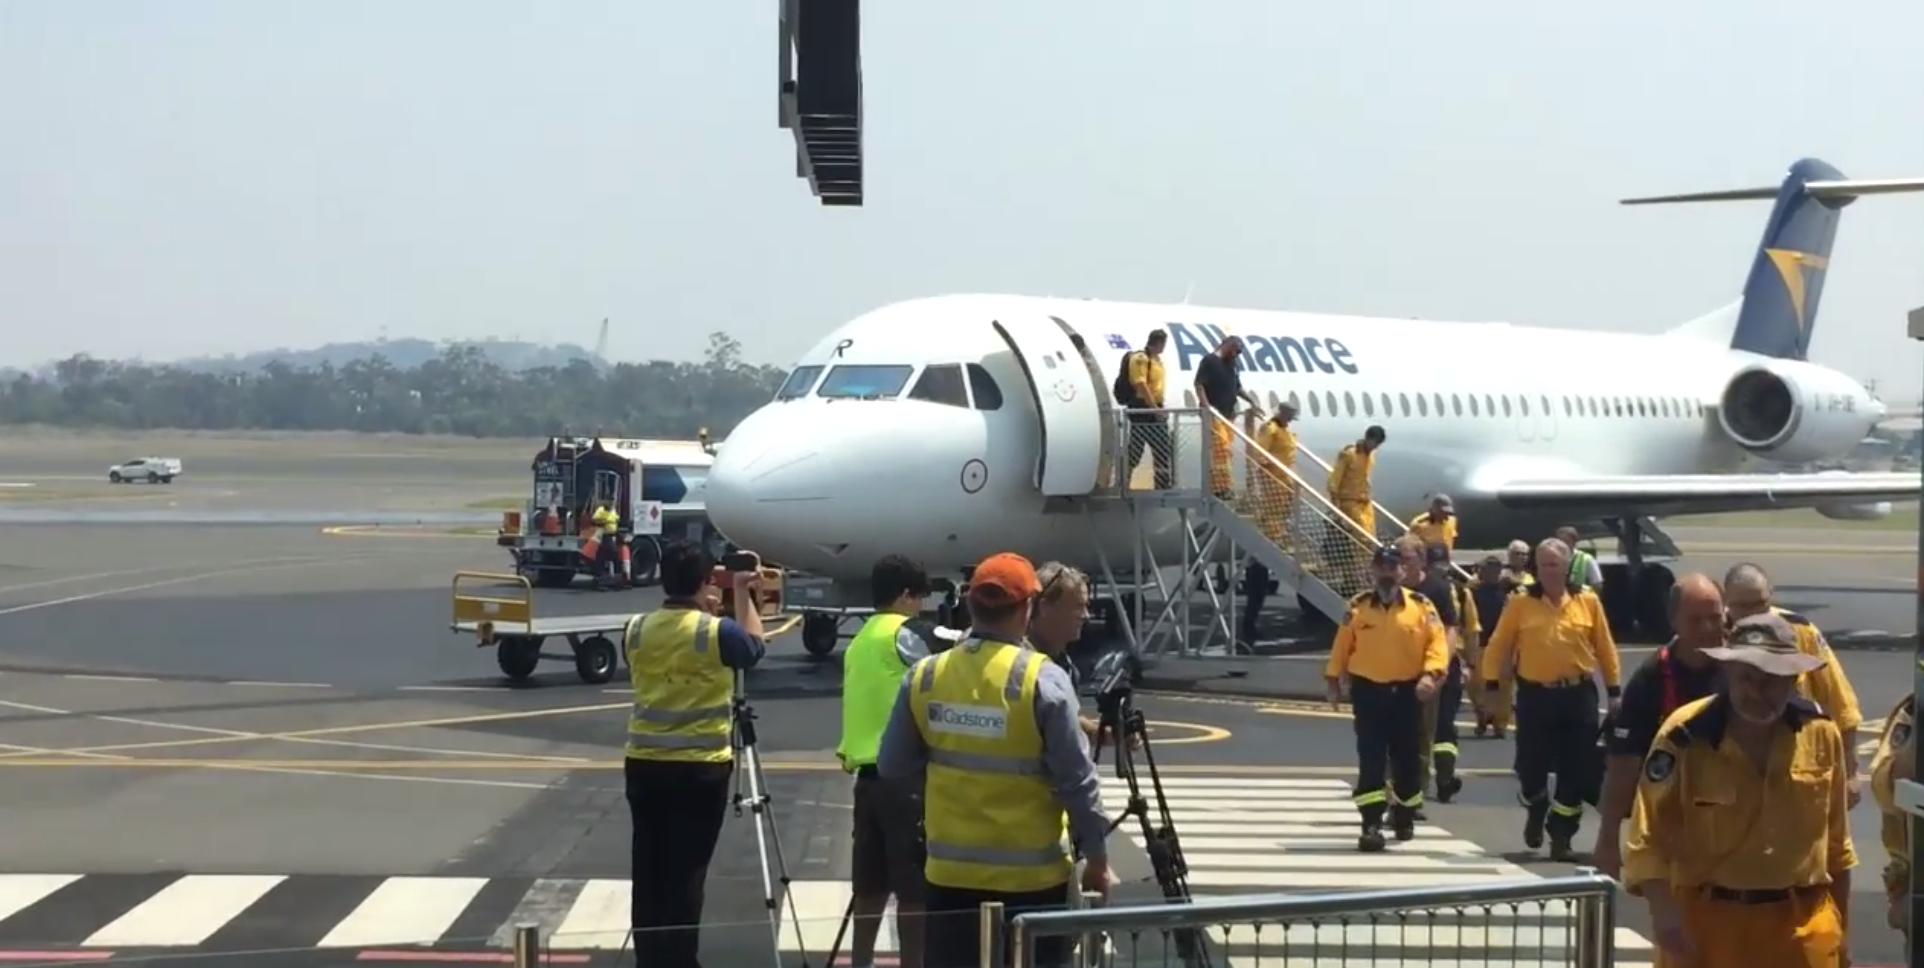 NSW firefighters arrive at the airport